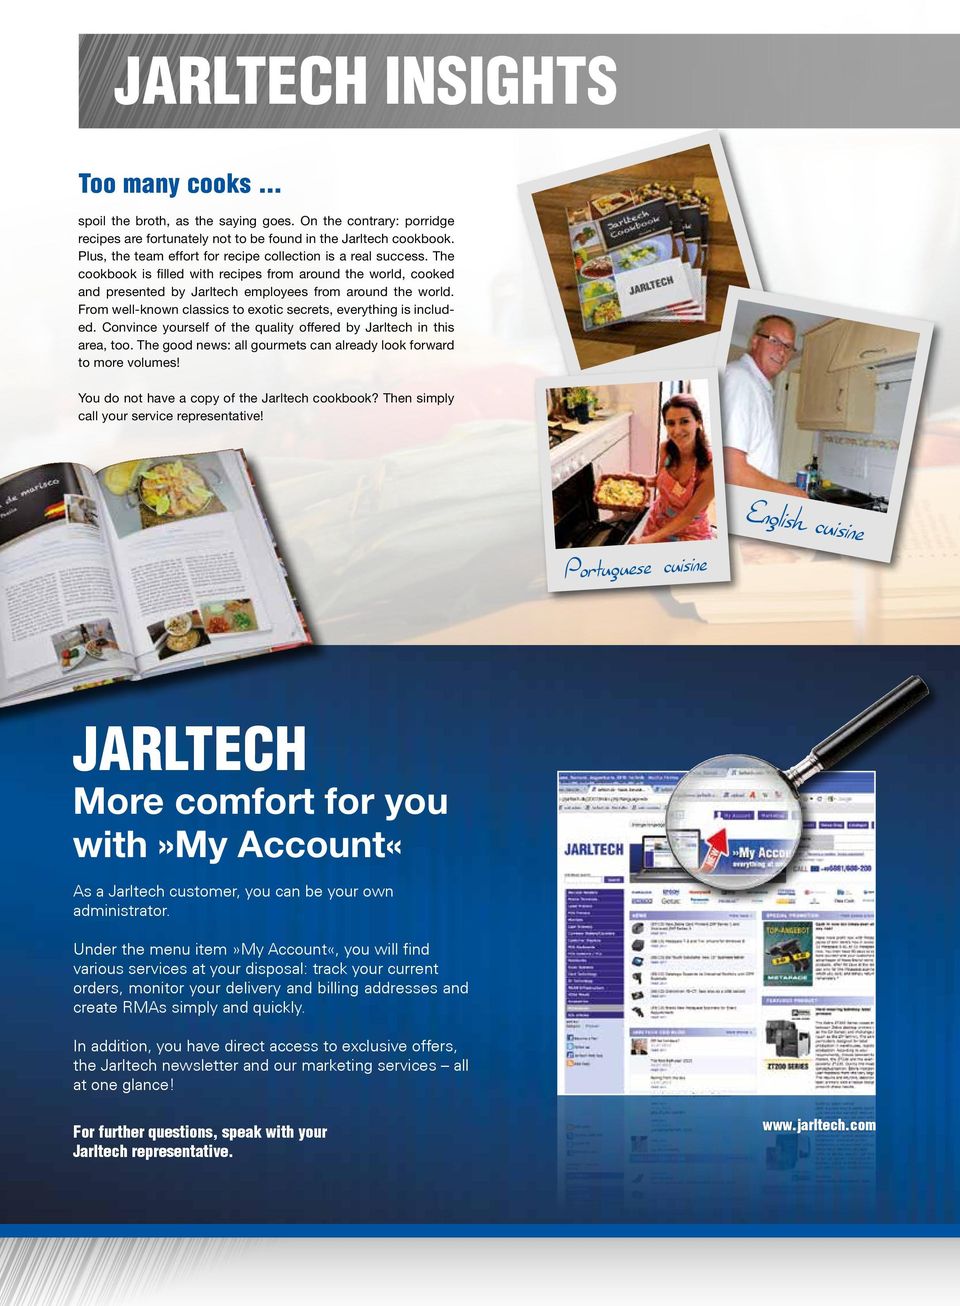 From well-known classics to exotic secrets, everything is included. Convince yourself of the quality offered by Jarltech in this area, too.